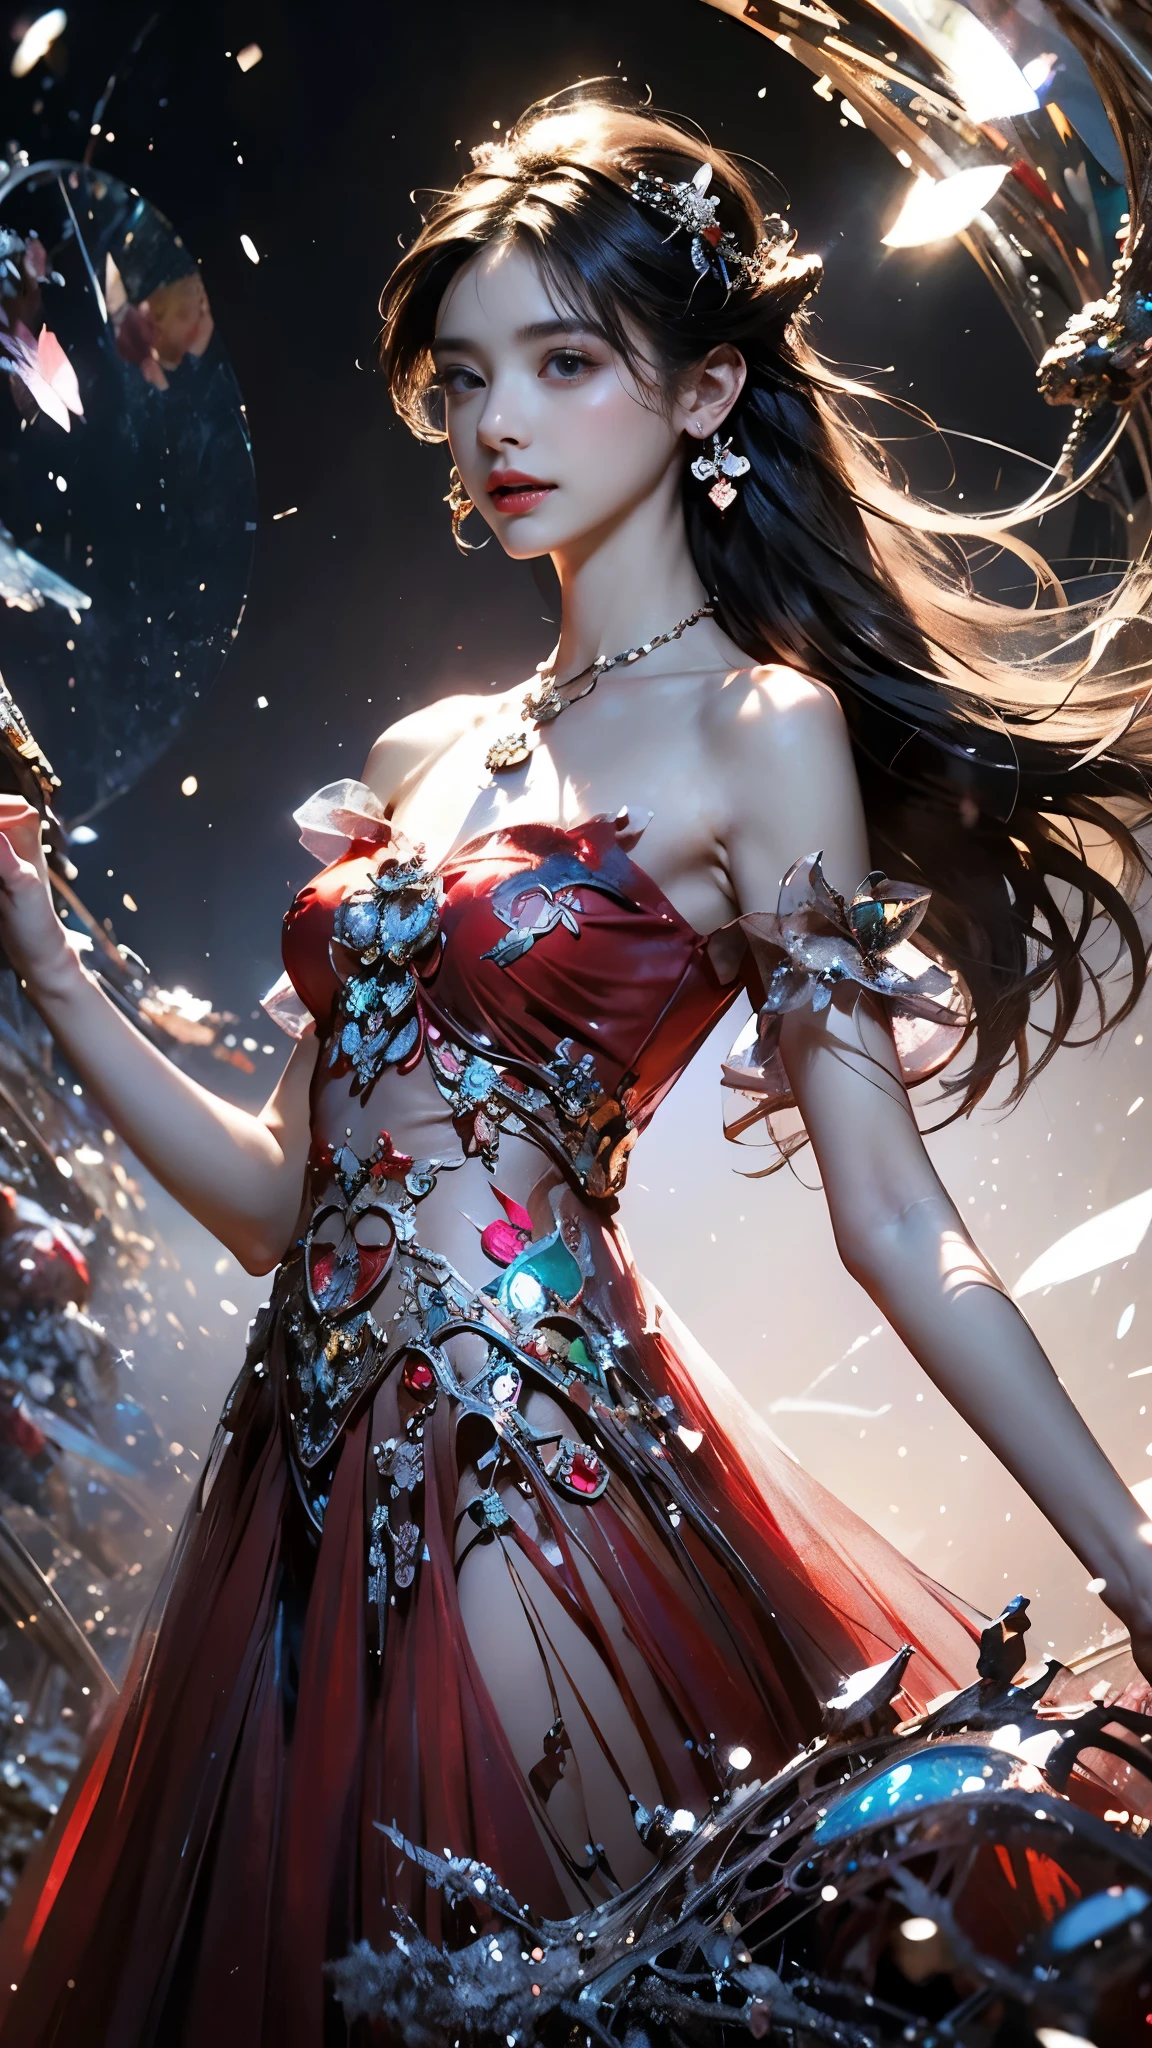 8K, ultra hd, masterpiece, 1 girl, (good face:1.4), detailed eyes, very long hair, impressive hairstyle, earings, necklace, small breasts, (red dress:1.5), see-through, (fantasy dress:1.5) Light-colored foundation brings out the transparency of the skin, (in the wonderland:1.5), mystery, diwali lights, glowing lights, very decoration, The lights falls like water, perfect body,